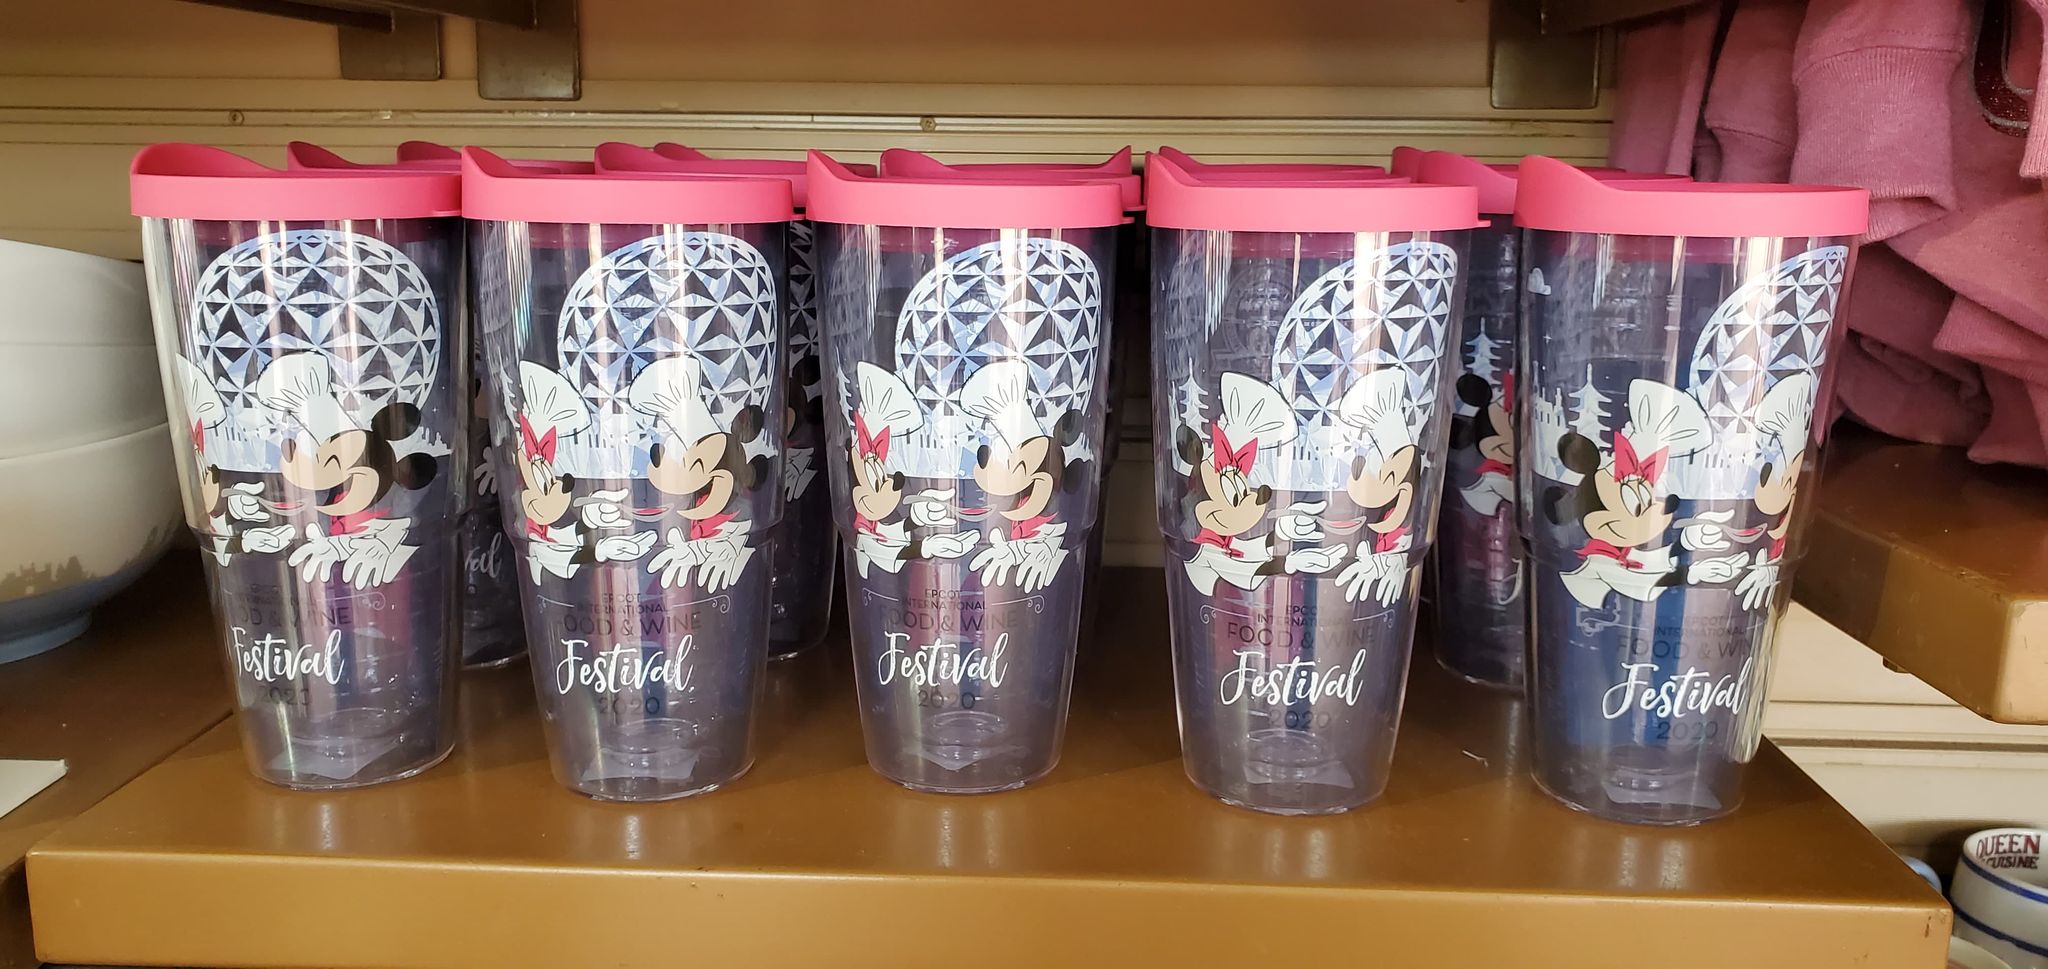 Take A Closer Look At This Year's Food And Wine Festival Merchandise